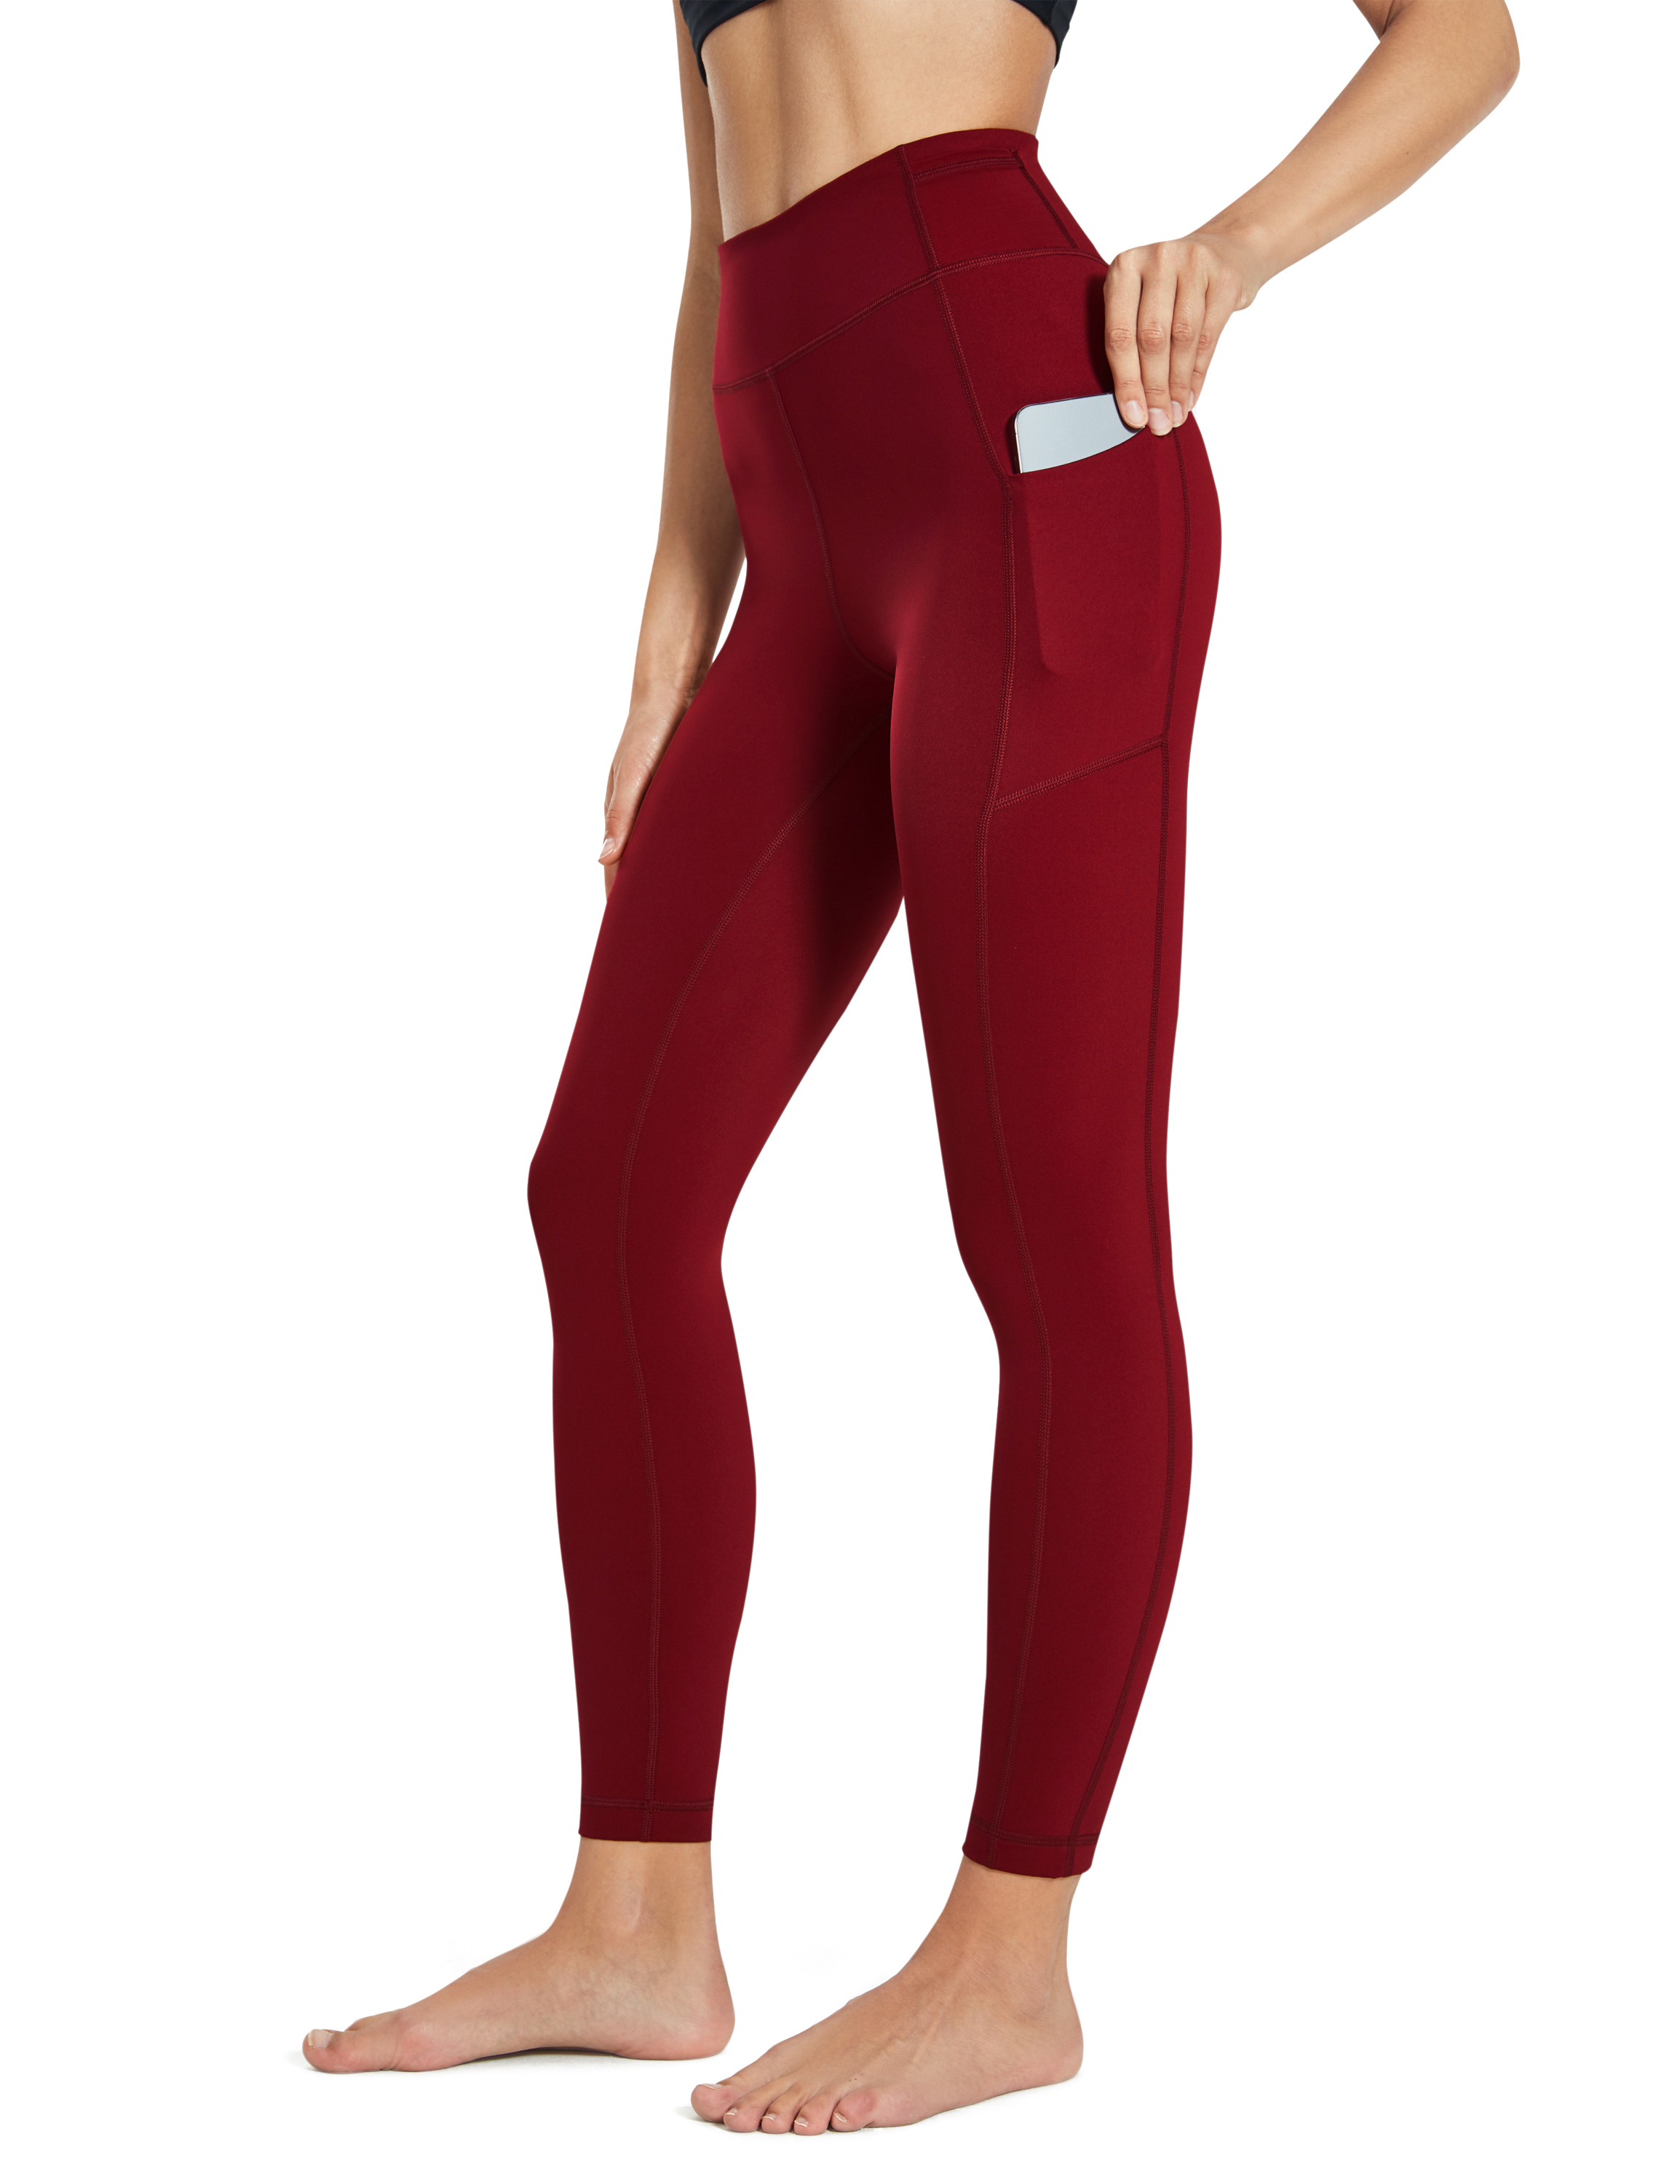 Women's Workout Leggings High Waisted Yoga Pants with Pocket 25